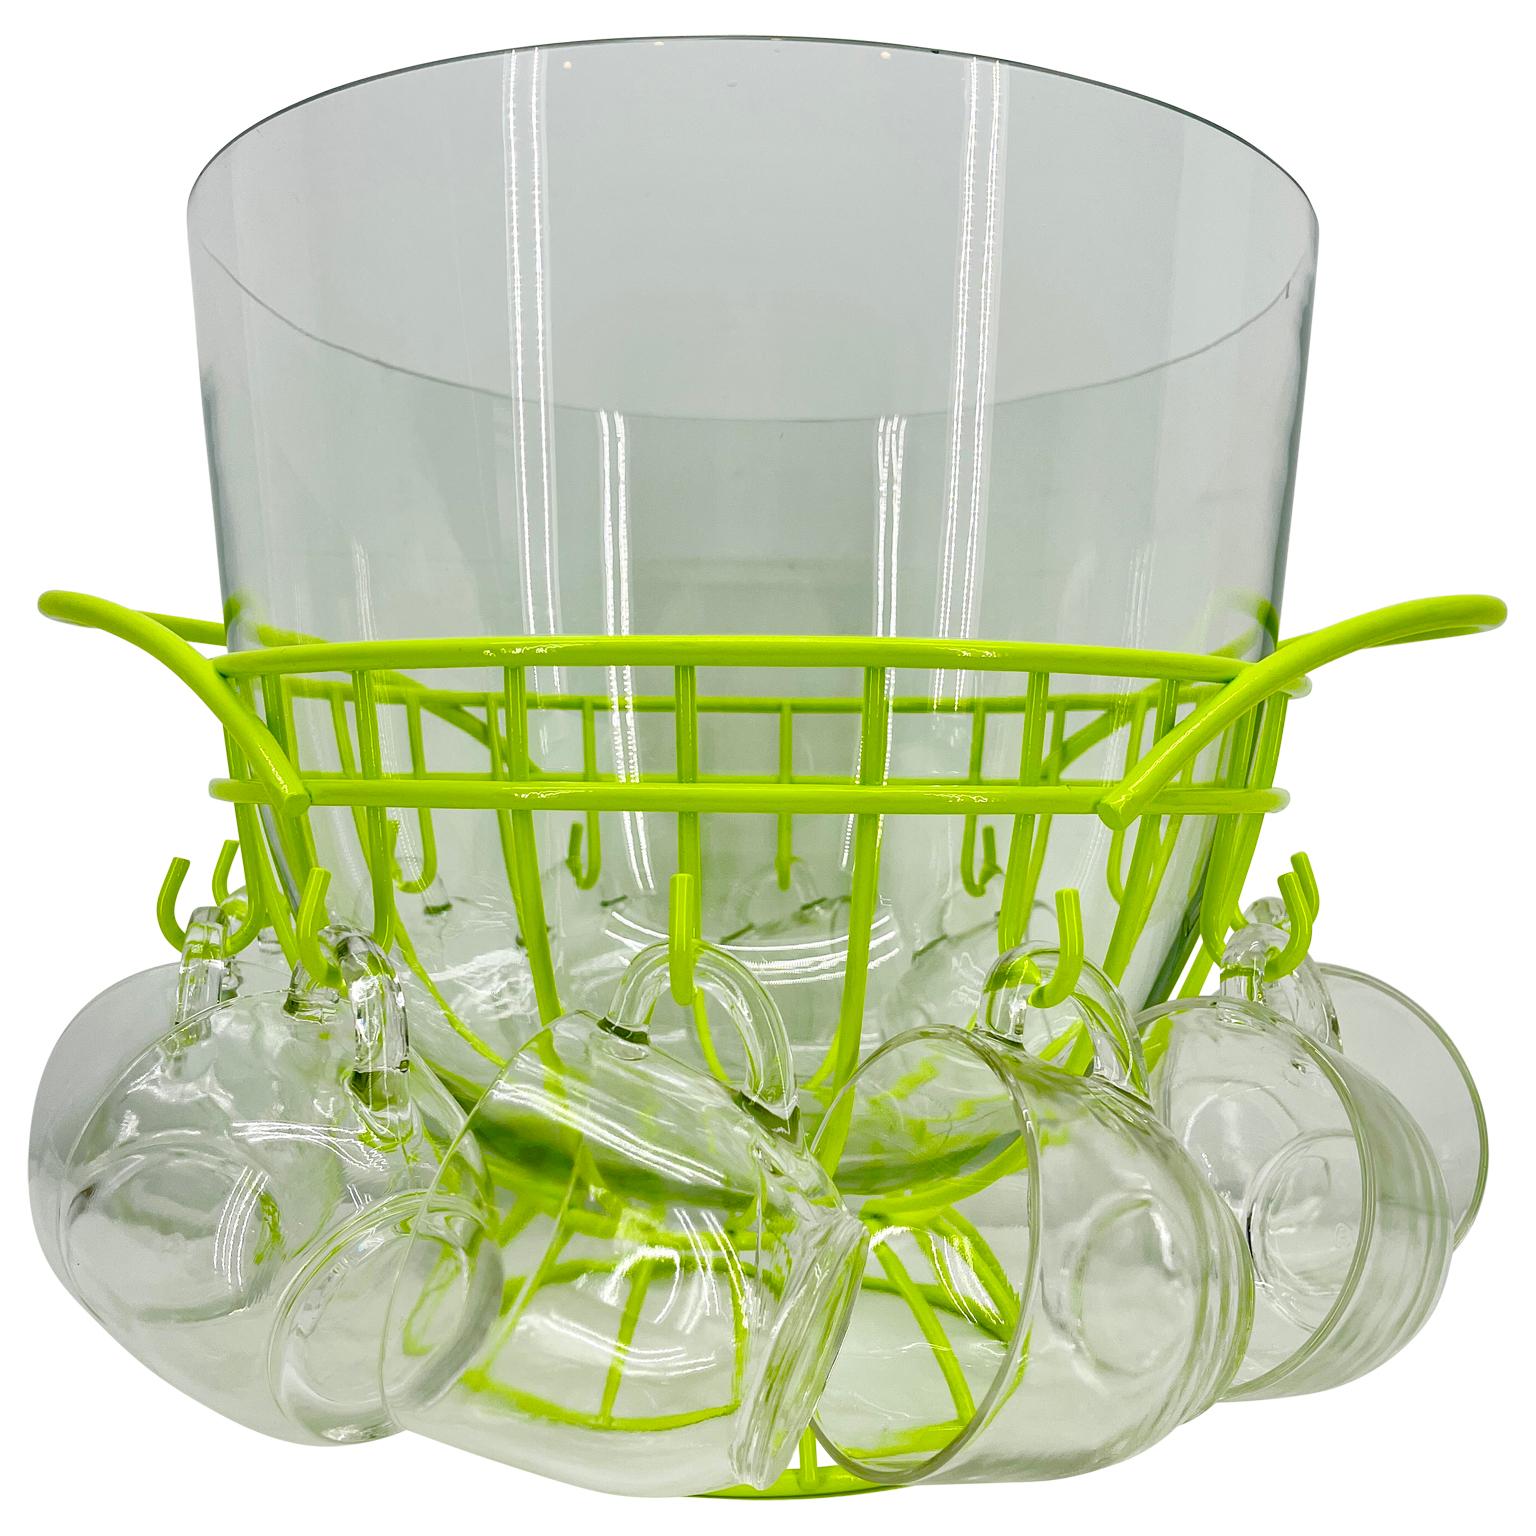 Bold chartreuse powder coated Mid-Century Modern punch bowl set. With large punch bowl and 11 cups, this set is a statement maker at your next party. The punch bowl is perfect for Sangria or any punch you can mix up and is fun and fantastic. The